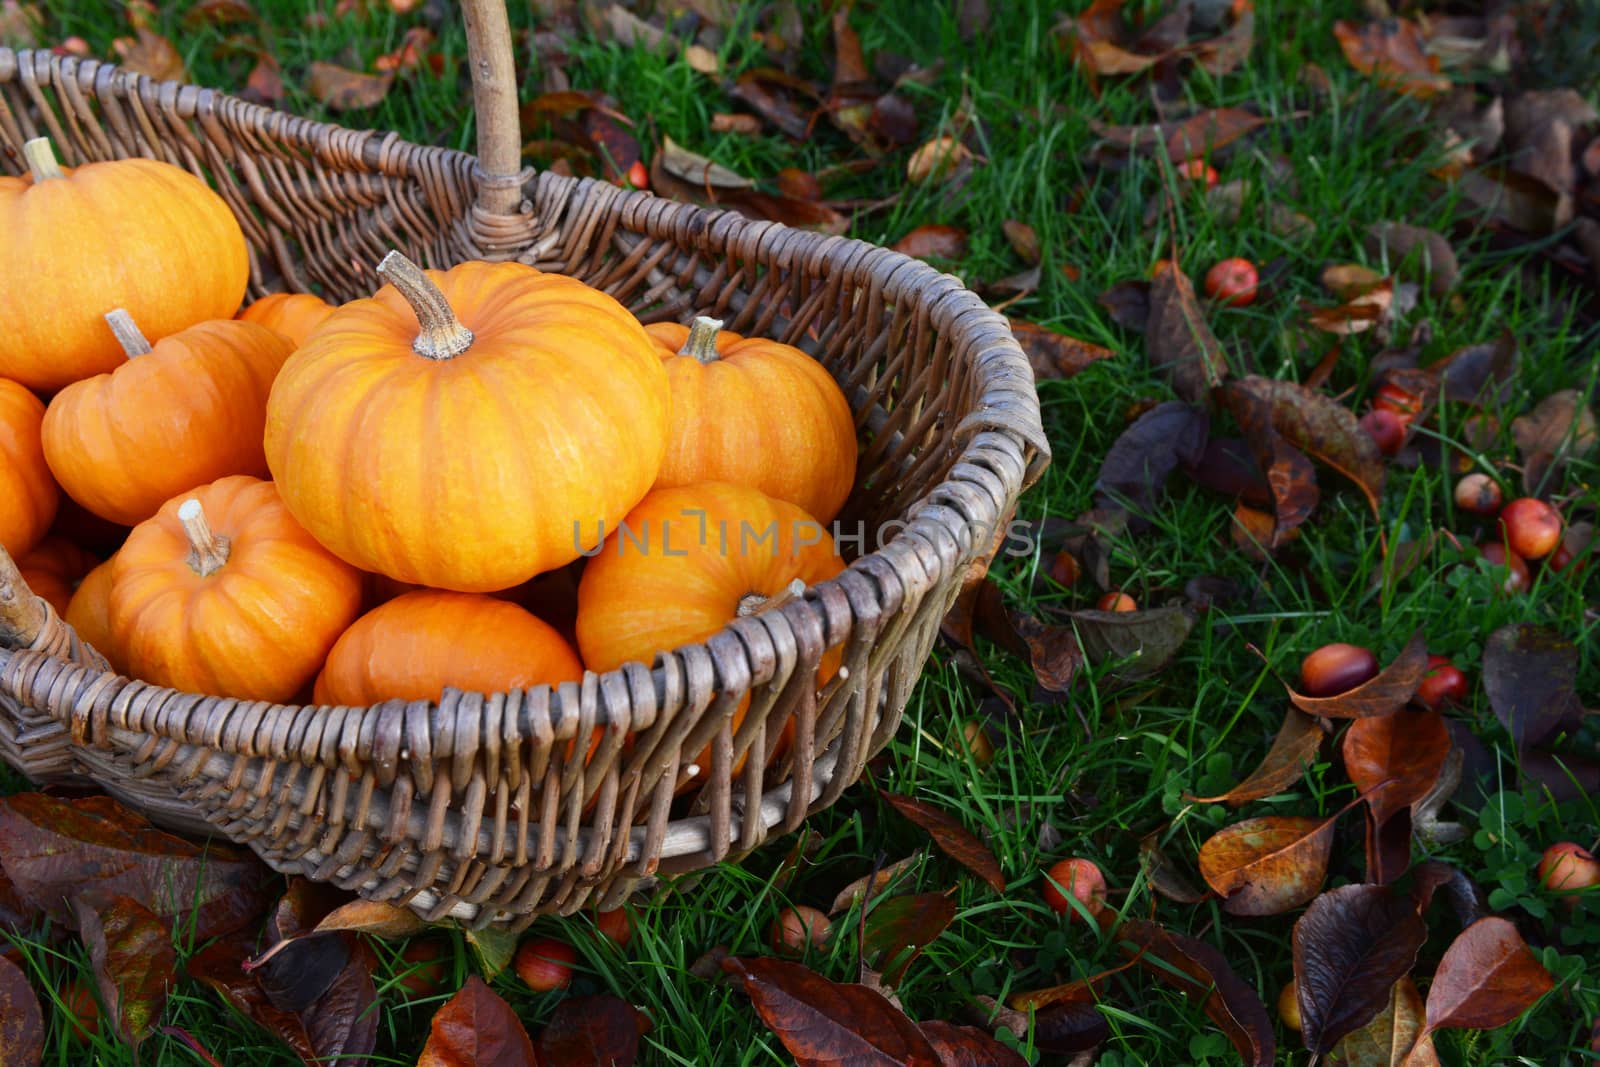 Rustic basket of small orange pumpkins for Thanksgiving decorations in a fall garden covered in leaves and crab apples